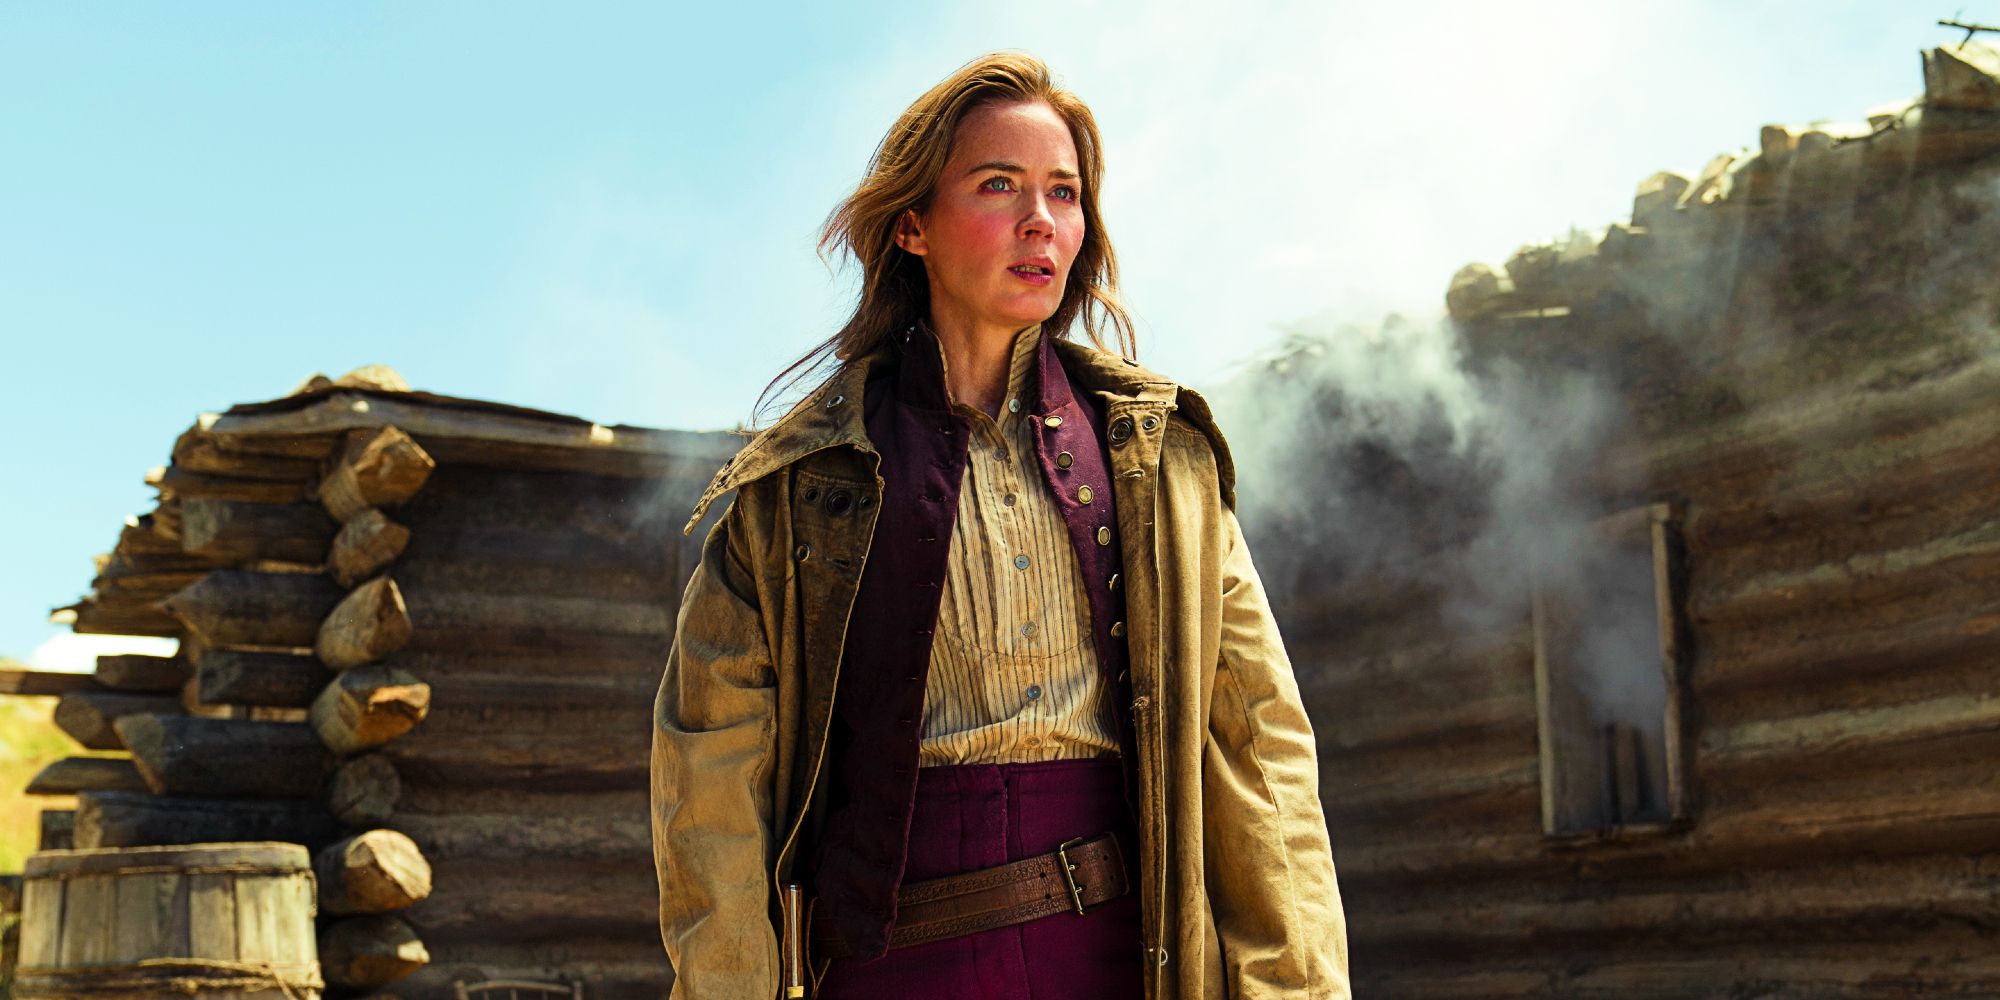 The English Emily Blunt as Lady Cornelia Locke standing in front of a cabin